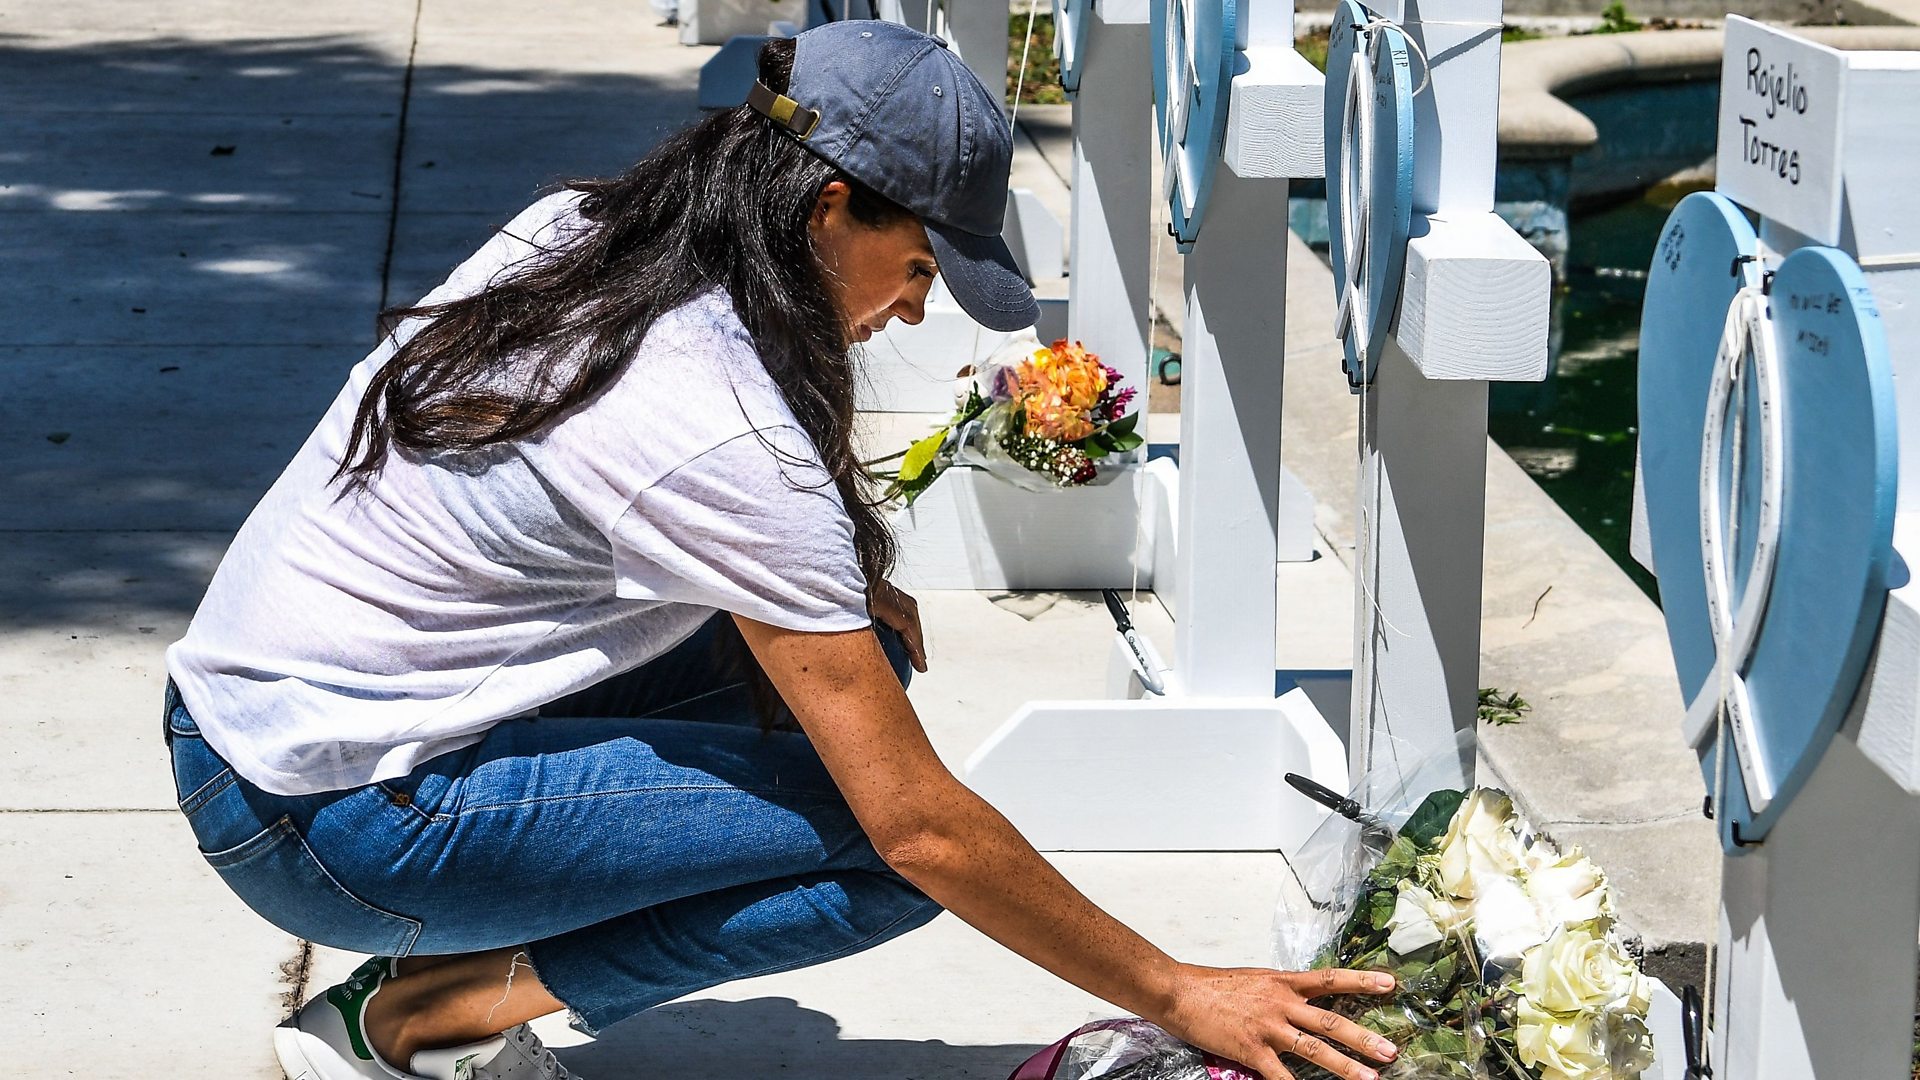 Meghan Markle visits memorial for Texas shooting victims